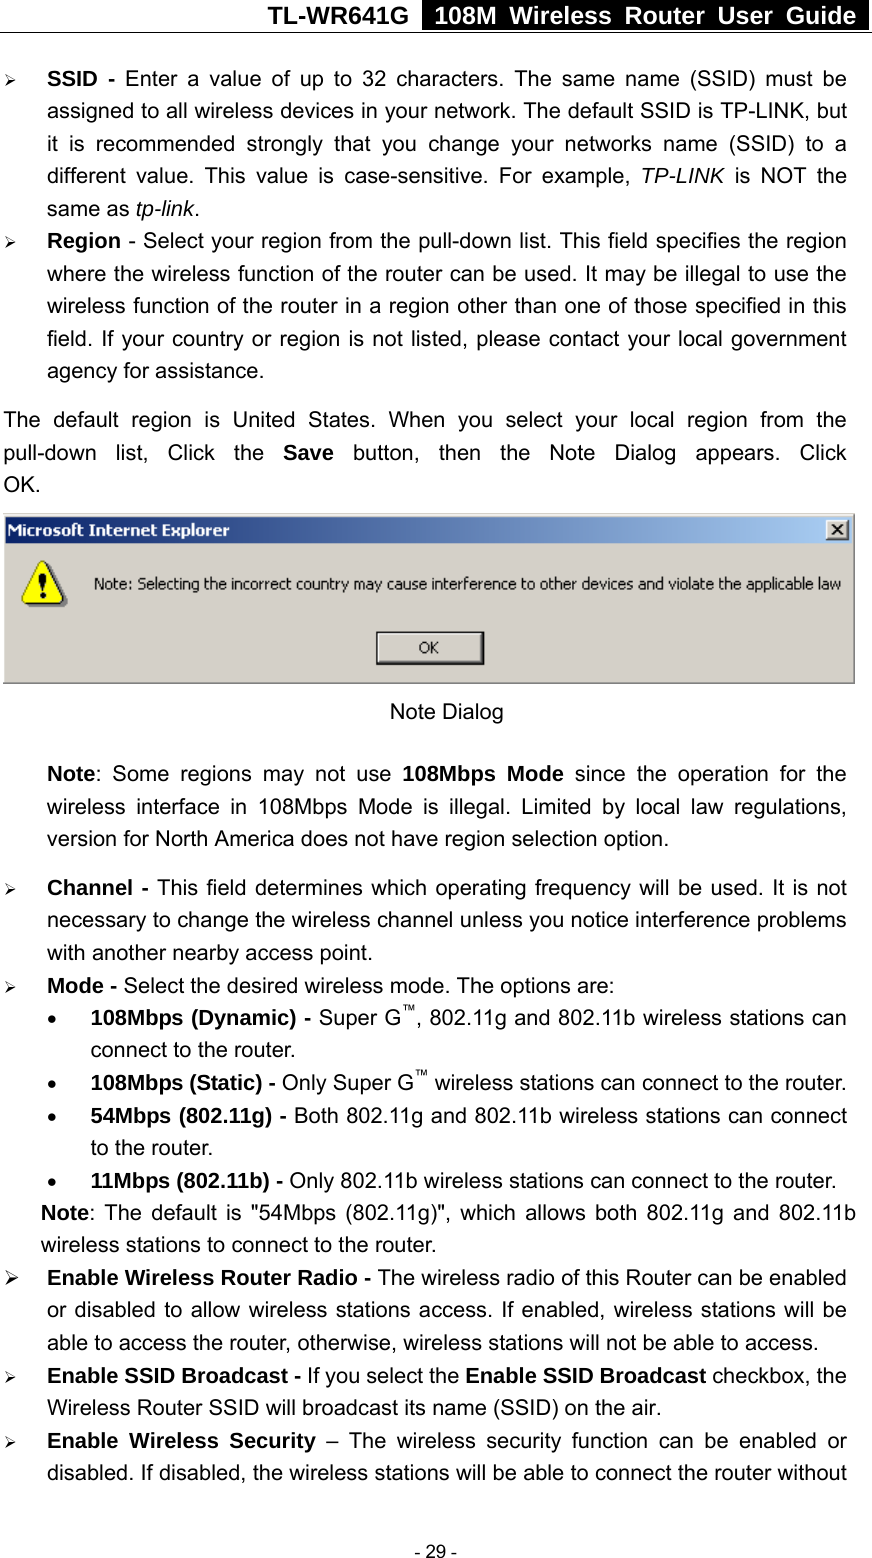 TL-WR641G   108M Wireless Router User Guide  ¾ SSID - Enter a value of up to 32 characters. The same name (SSID) must be assigned to all wireless devices in your network. The default SSID is TP-LINK, but it is recommended strongly that you change your networks name (SSID) to a different value. This value is case-sensitive. For example, TP-LINK is NOT the same as tp-link. ¾ Region - Select your region from the pull-down list. This field specifies the region where the wireless function of the router can be used. It may be illegal to use the wireless function of the router in a region other than one of those specified in this field. If your country or region is not listed, please contact your local government agency for assistance. The default region is United States. When you select your local region from the pull-down list, Click the Save  button, then the Note Dialog appears. Click OK. Note Dialog   Note: Some regions may not use 108Mbps Mode since the operation for the wireless interface in 108Mbps Mode is illegal. Limited by local law regulations, version for North America does not have region selection option. ¾ Channel - This field determines which operating frequency will be used. It is not necessary to change the wireless channel unless you notice interference problems with another nearby access point. ¾ Mode - Select the desired wireless mode. The options are:   • 108Mbps (Dynamic) - Super G™, 802.11g and 802.11b wireless stations can connect to the router. • 108Mbps (Static) - Only Super G™ wireless stations can connect to the router. • 54Mbps (802.11g) - Both 802.11g and 802.11b wireless stations can connect to the router. • 11Mbps (802.11b) - Only 802.11b wireless stations can connect to the router. Note: The default is &quot;54Mbps (802.11g)&quot;, which allows both 802.11g and 802.11b wireless stations to connect to the router. ¾ Enable Wireless Router Radio - The wireless radio of this Router can be enabled or disabled to allow wireless stations access. If enabled, wireless stations will be able to access the router, otherwise, wireless stations will not be able to access. ¾ Enable SSID Broadcast - If you select the Enable SSID Broadcast checkbox, the Wireless Router SSID will broadcast its name (SSID) on the air. ¾ Enable Wireless Security – The wireless security function can be enabled or disabled. If disabled, the wireless stations will be able to connect the router without  - 29 - 